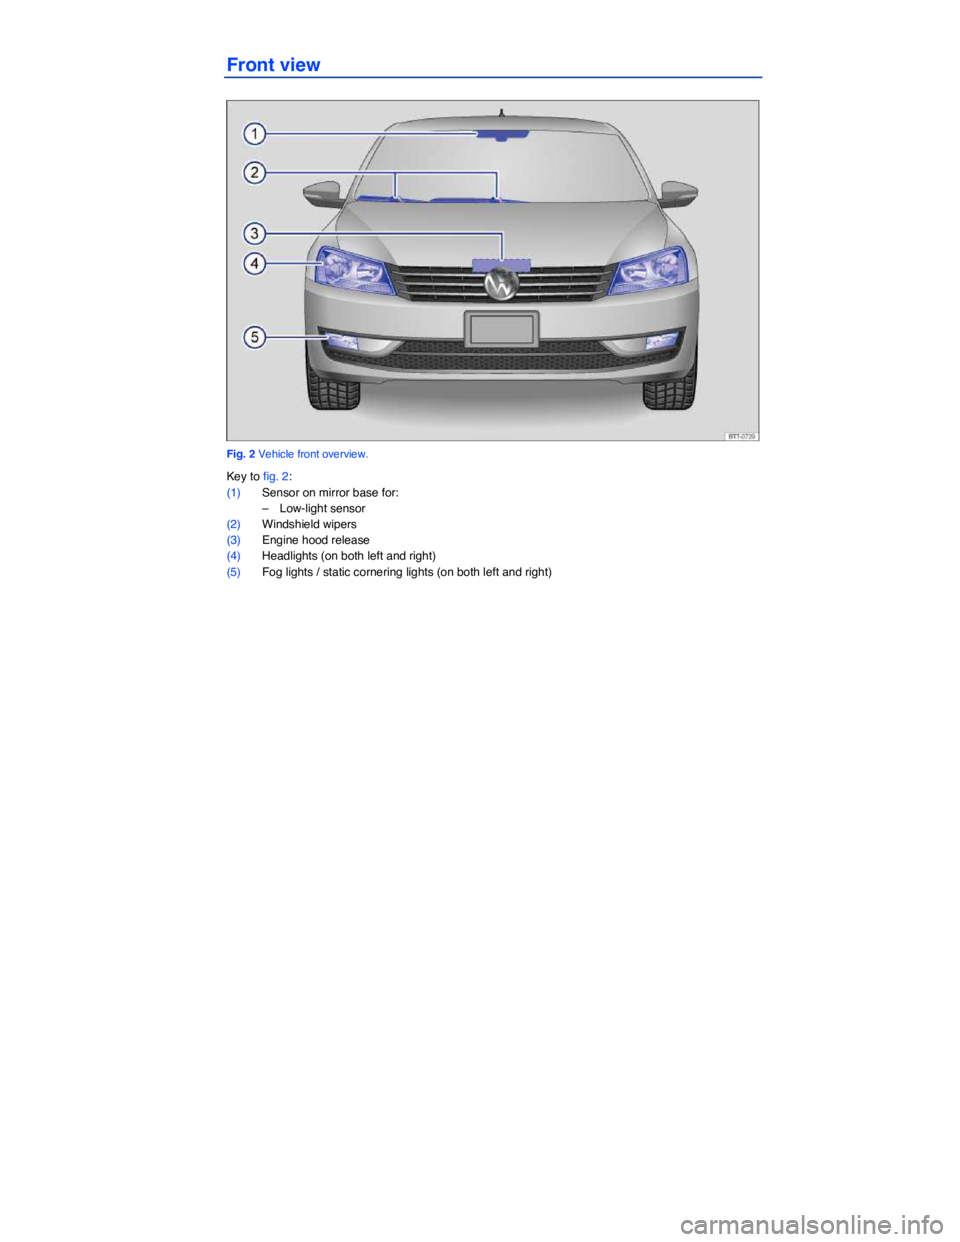 VOLKSWAGEN PASSAT 2013  Owners Manual  
Front view 
 
Fig. 2 Vehicle front overview. 
Key to fig. 2: 
(1) Sensor on mirror base for: 
–  Low-light sensor  
(2) Windshield wipers  
(3) Engine hood release  
(4) Headlights (on both left a